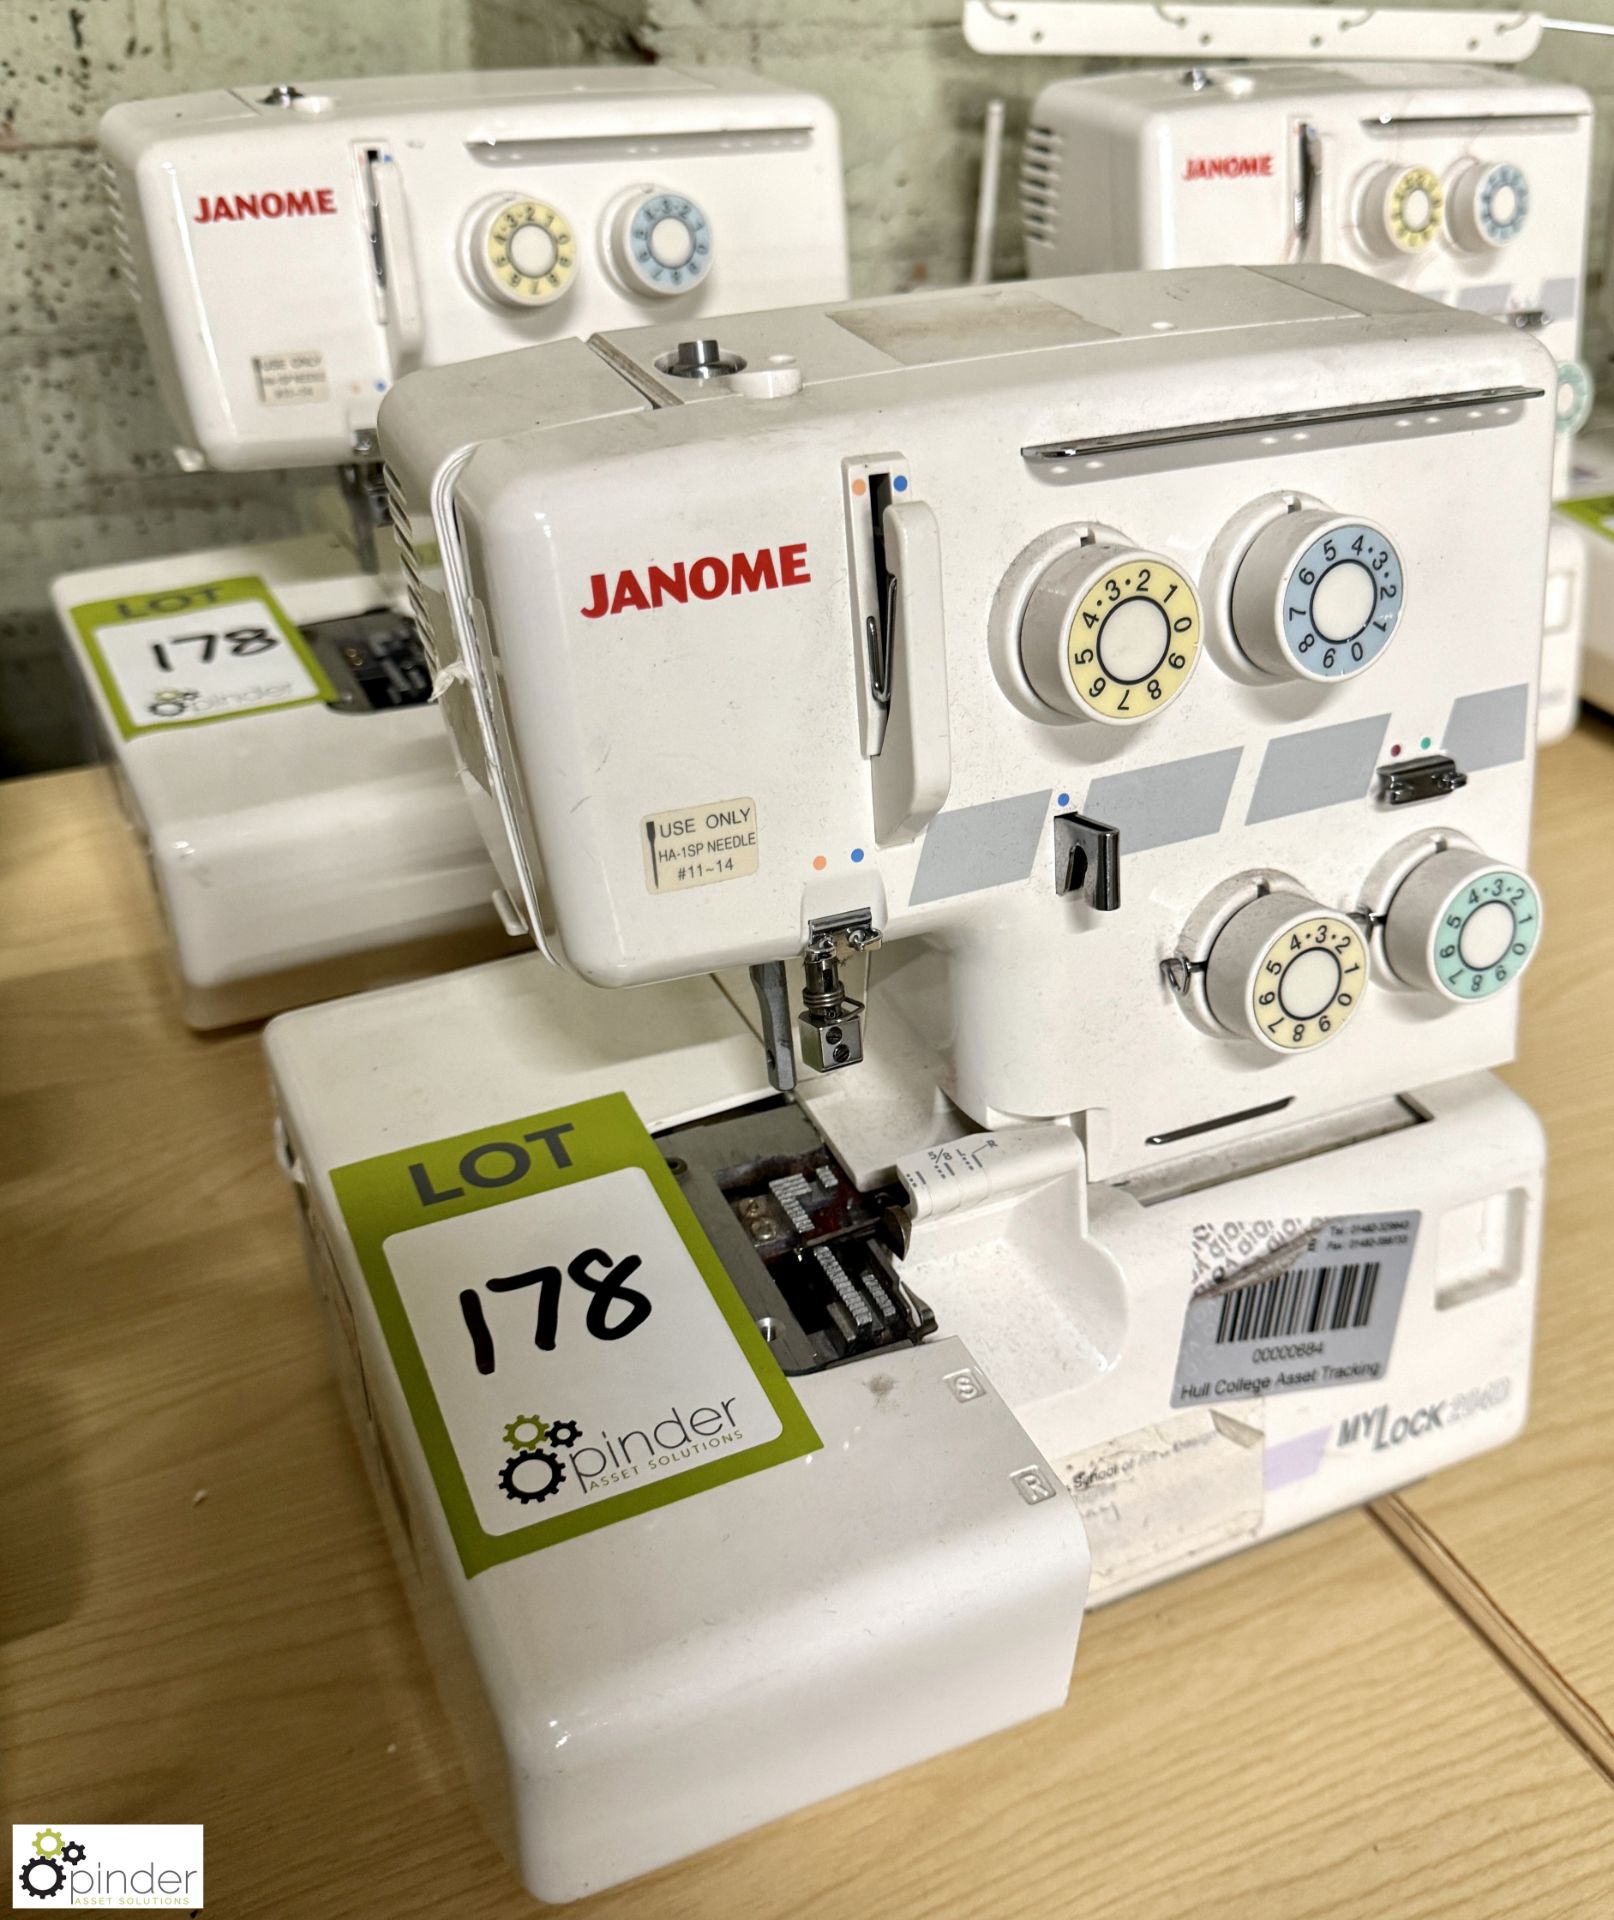 2 Janome MyLock 204D 4-thread Overlockers, 240volts (no power leads or foot controls)